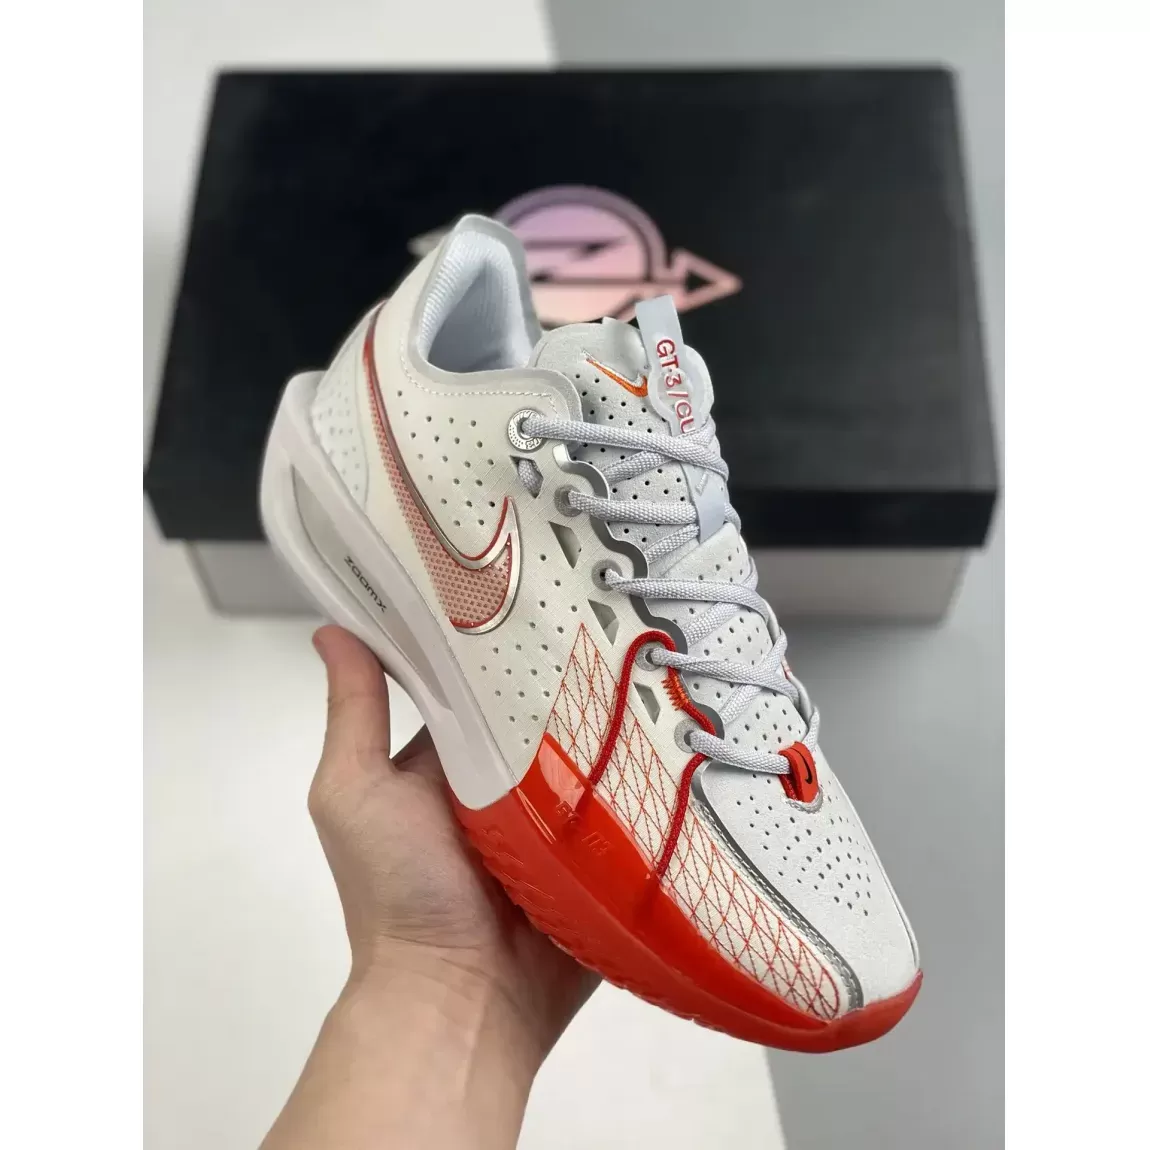 Nike GT Cut 3 White Picante Red